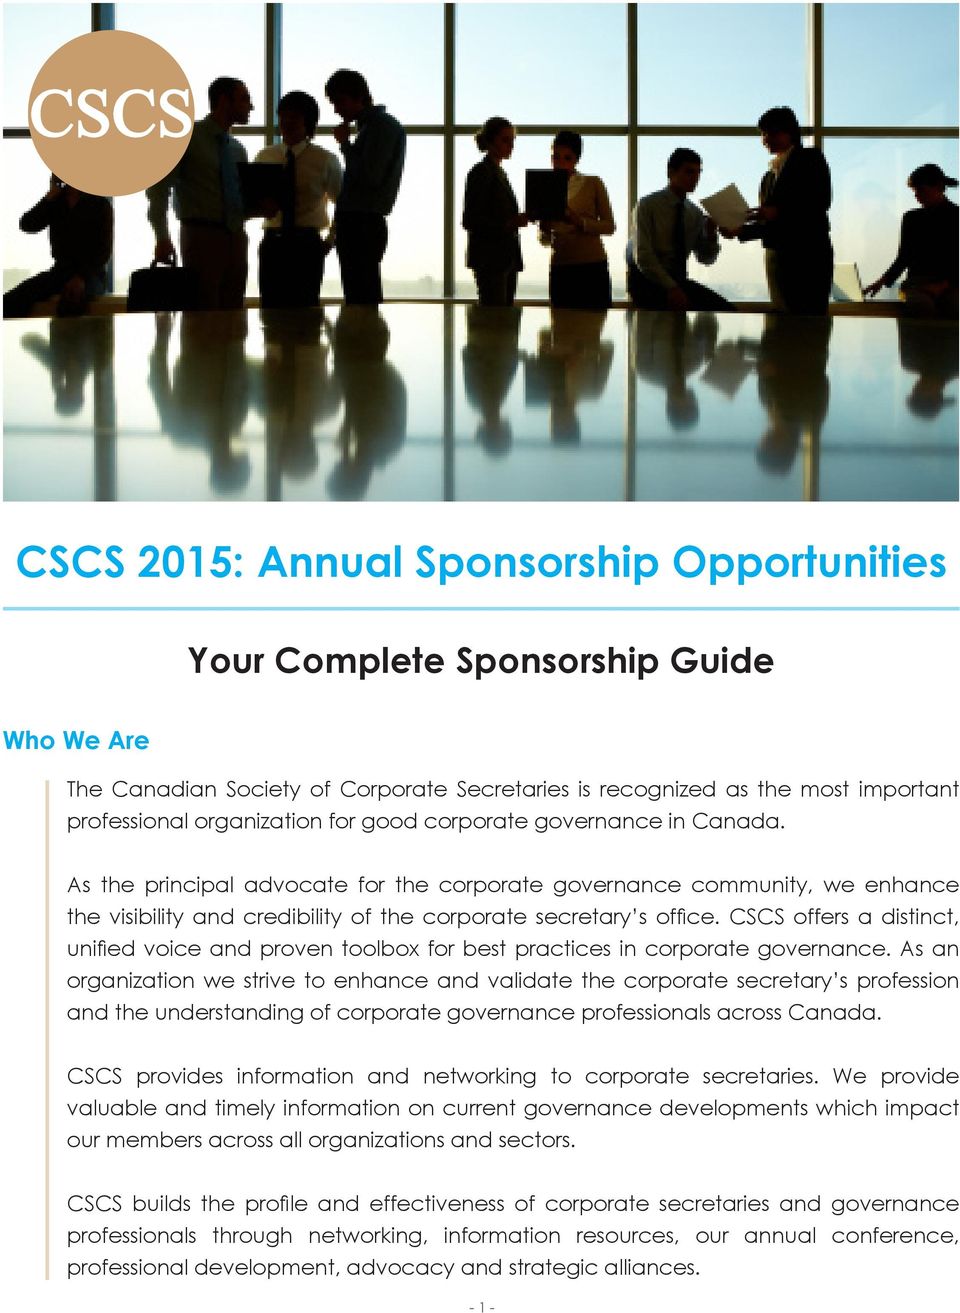 CSCS offers a distinct, unified voice and proven toolbox for best practices in corporate governance.